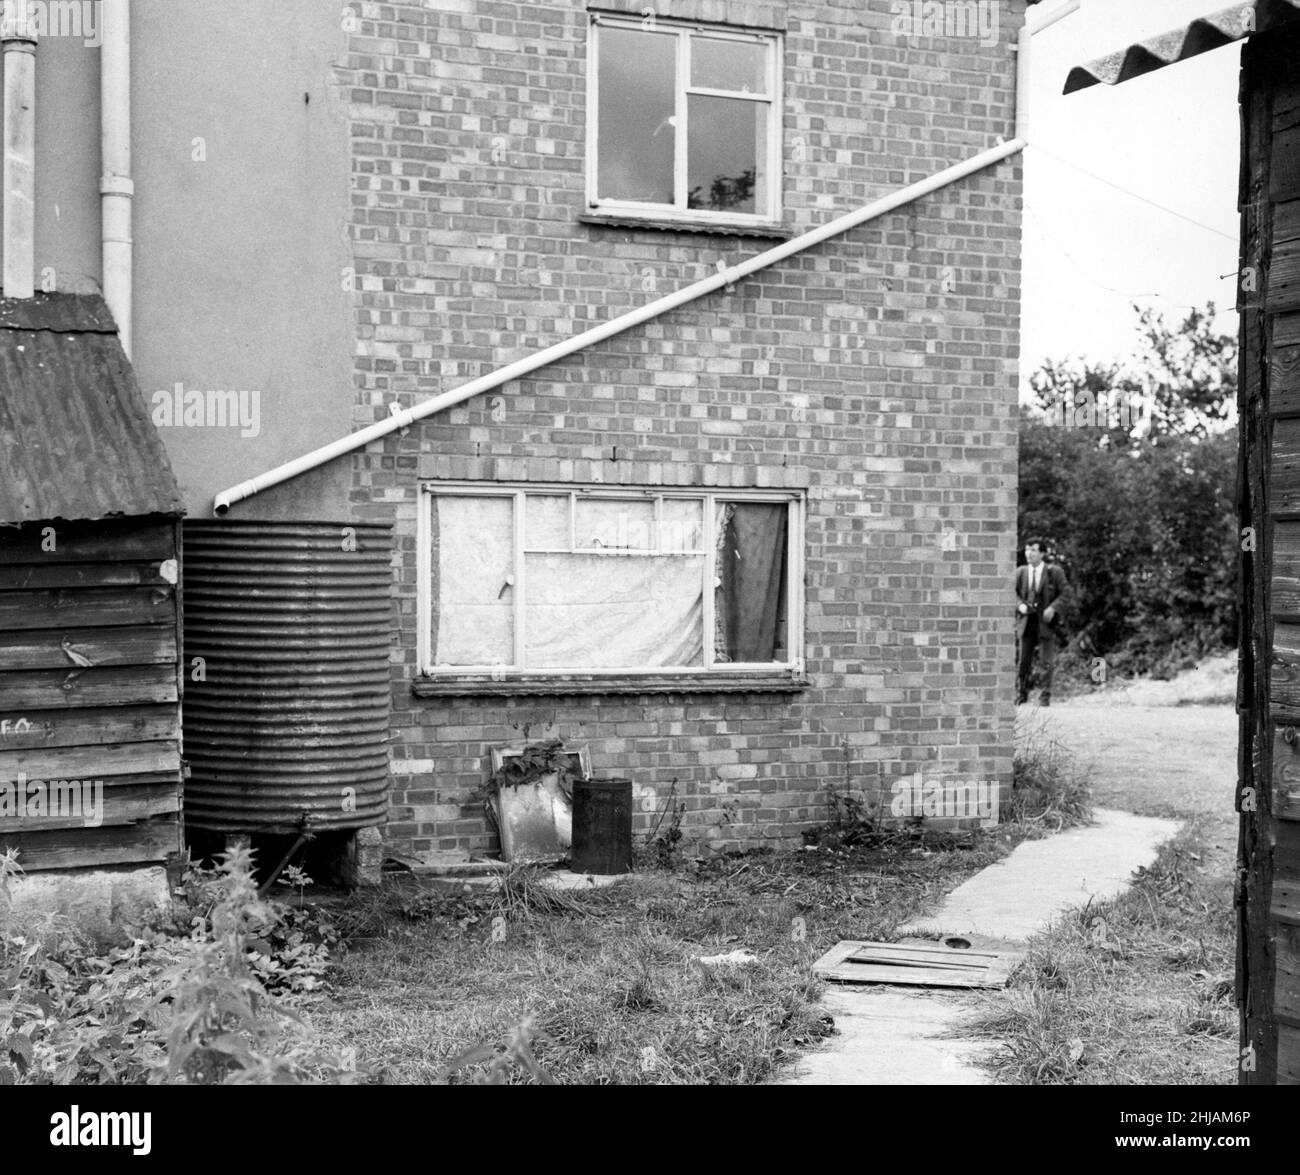 Leatherslade Farm at Oakley Buckinghamshire, where the Great Train Robbers hid. 26th August 1963. OPS Extension building where the land-rover used in the robbery was hidden. Stock Photo